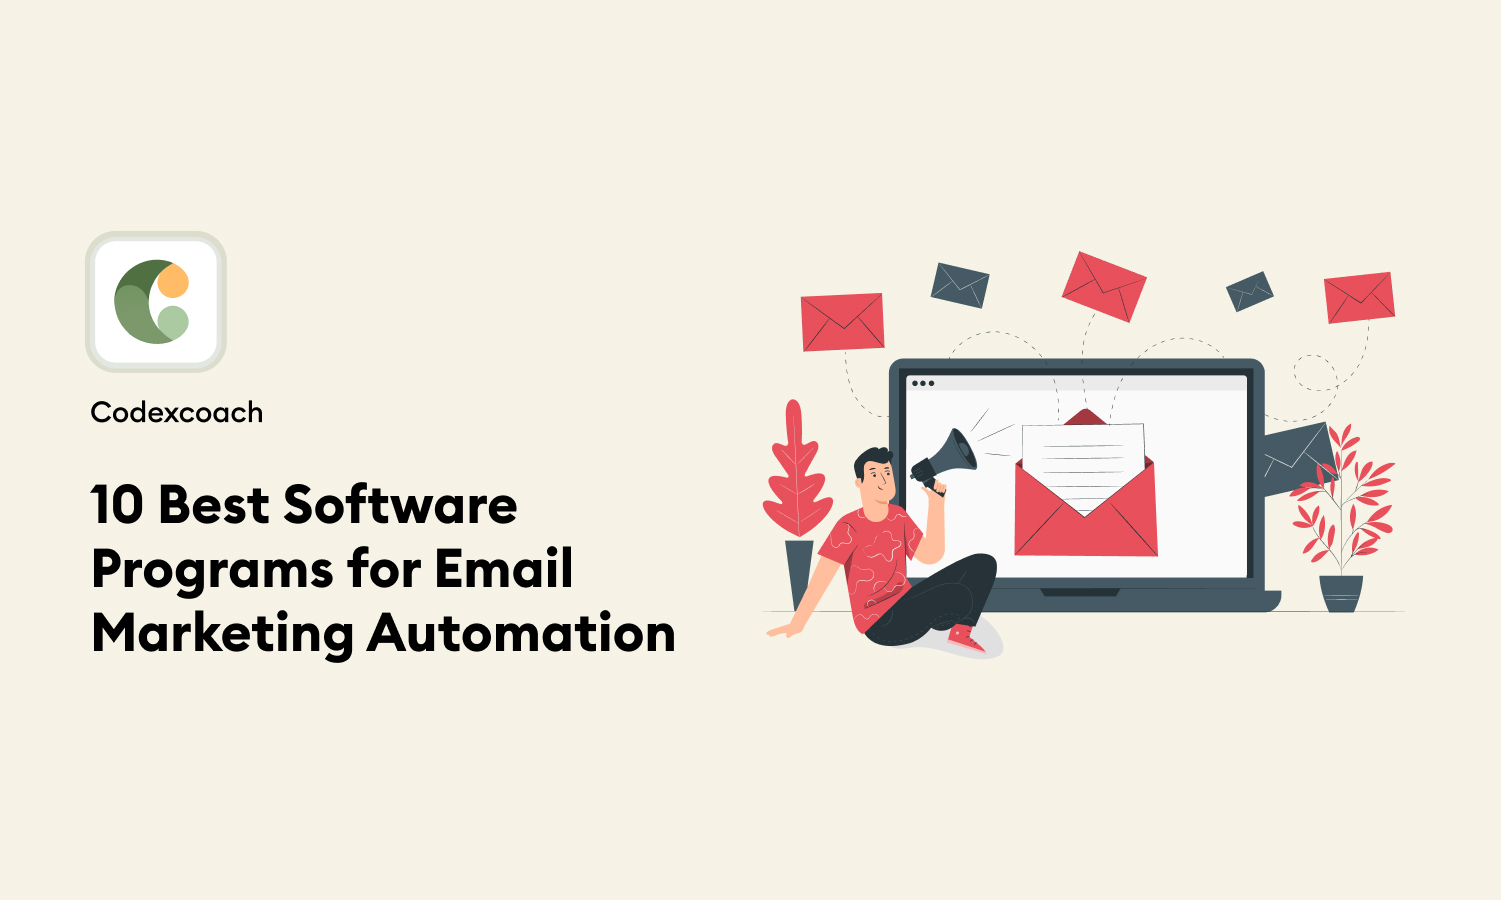 10 Best Software Programs for Email Marketing Automation